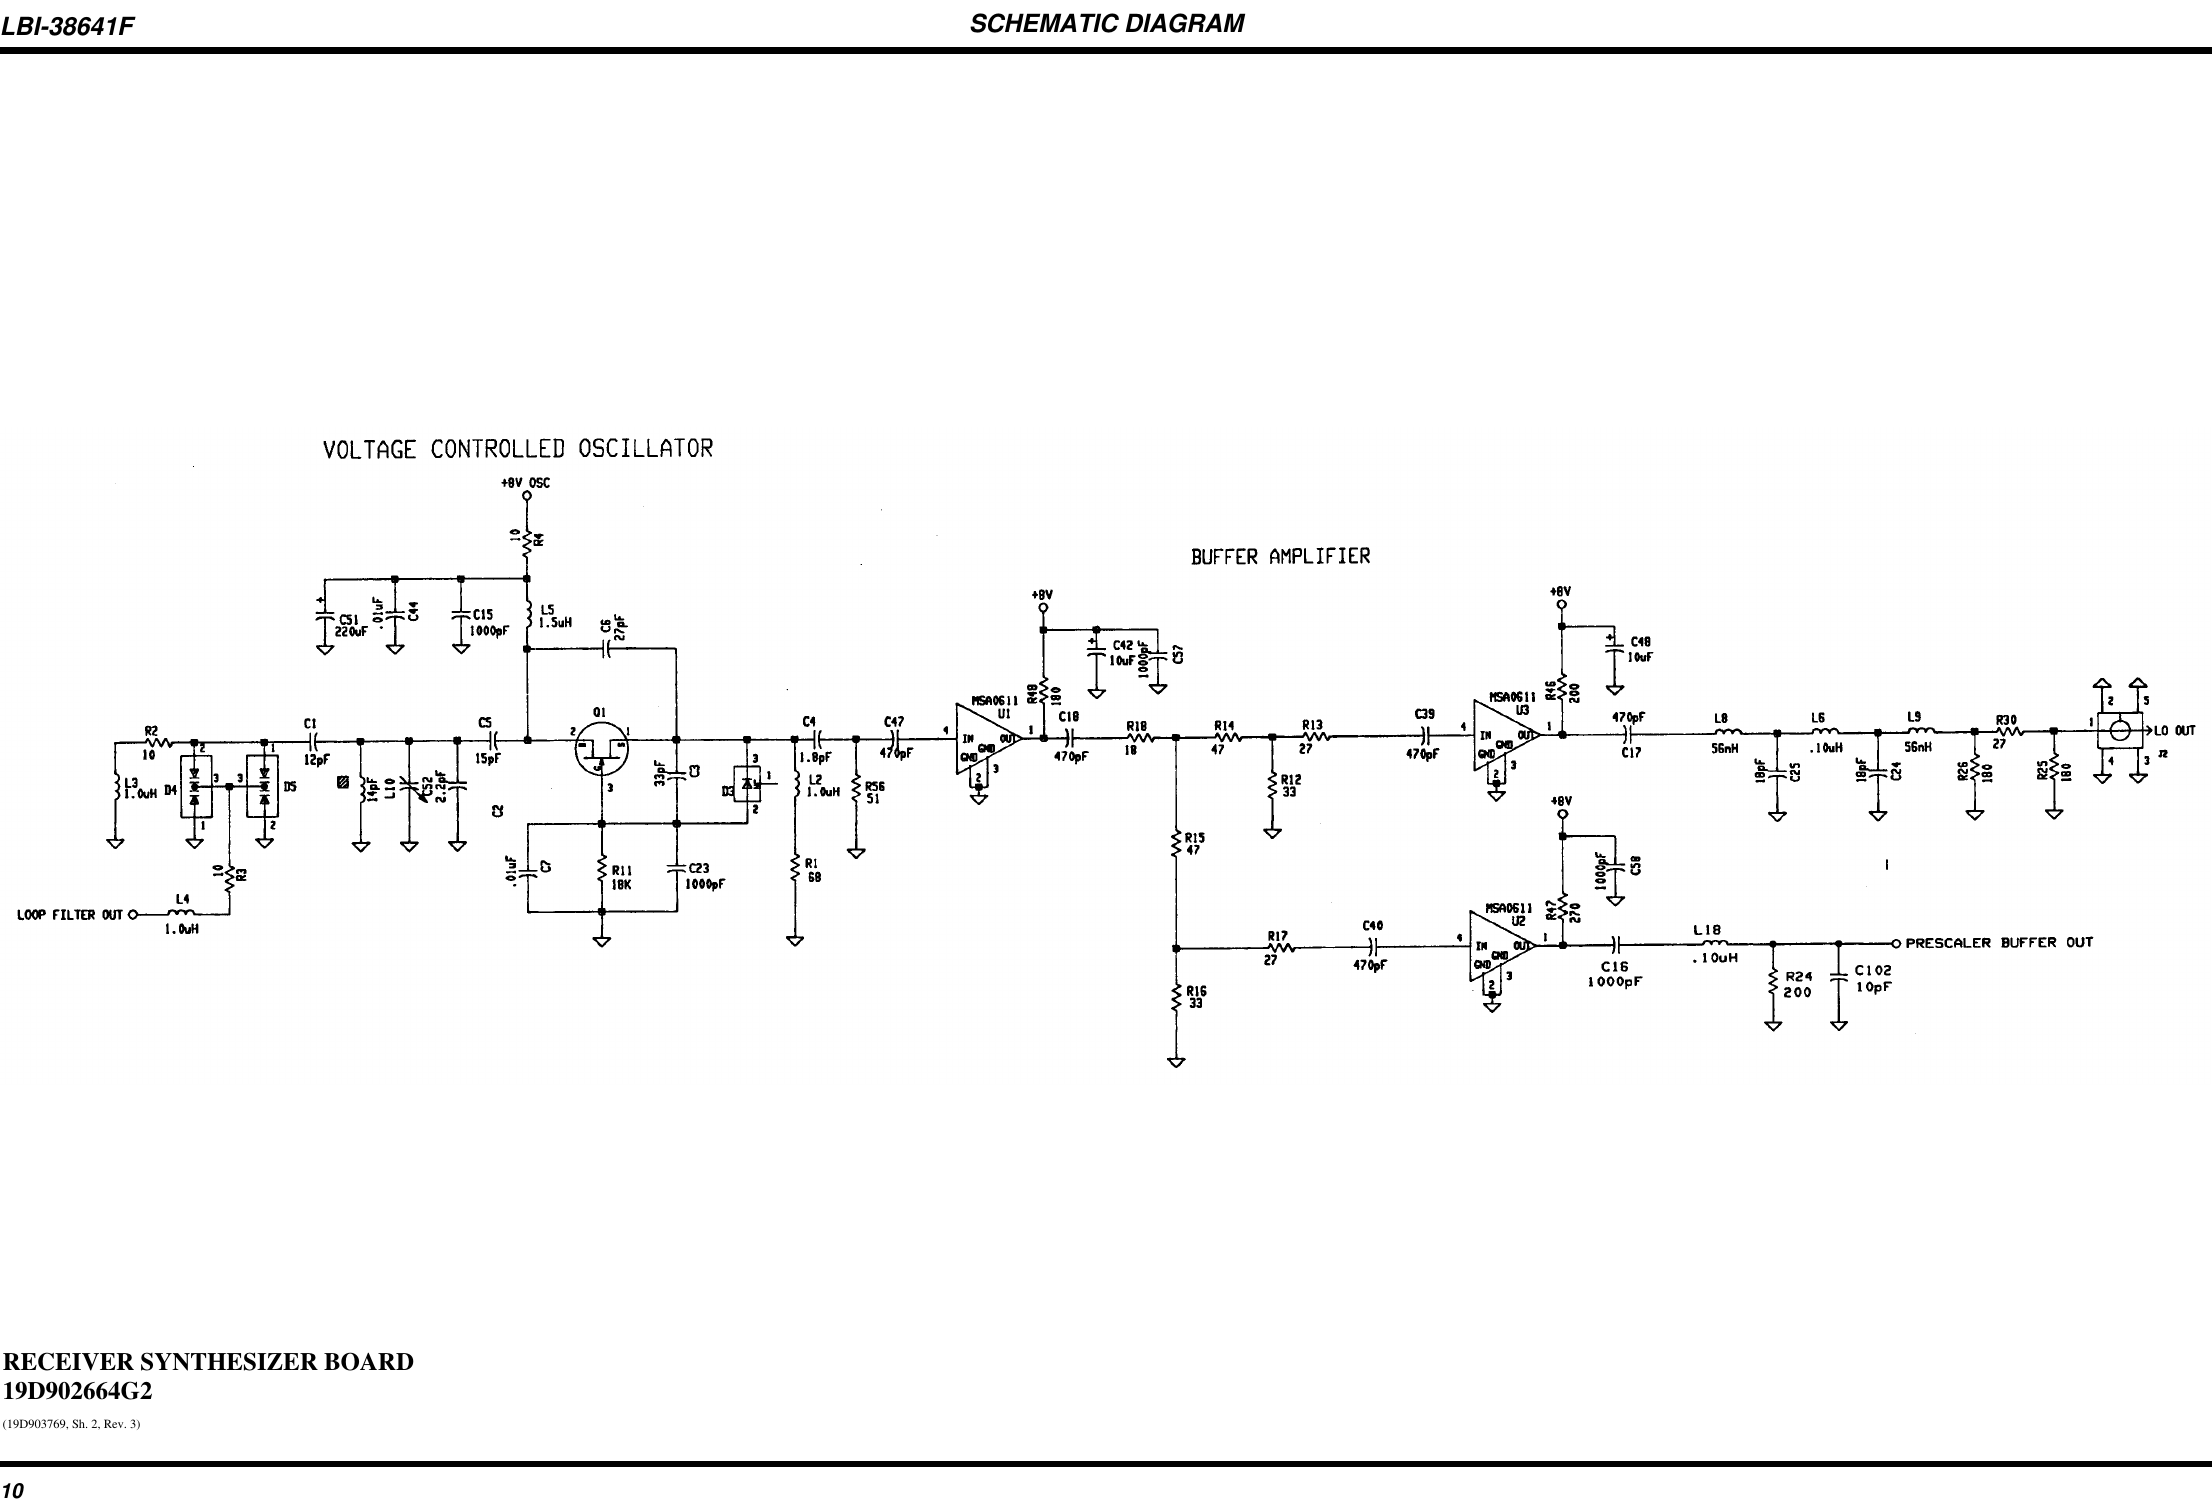 SCHEMATIC DIAGRAMRECEIVER SYNTHESIZER BOARD19D902664G2(19D903769, Sh. 2, Rev. 3)LBI-38641F10